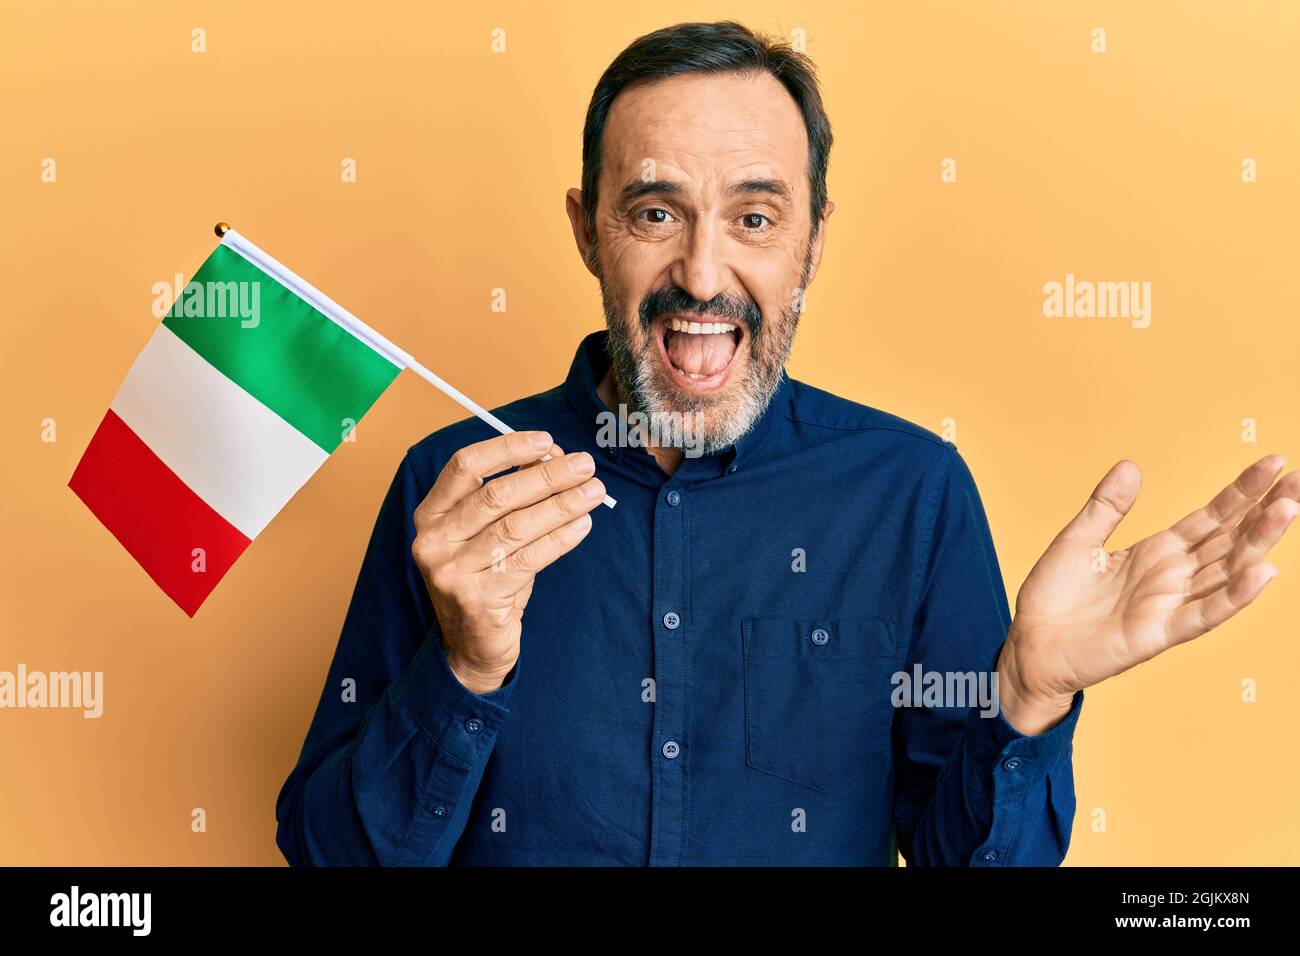 Middle age hispanic man holding italy flag celebrating achievement with happy smile and winner expression with raised hand Stock Photo